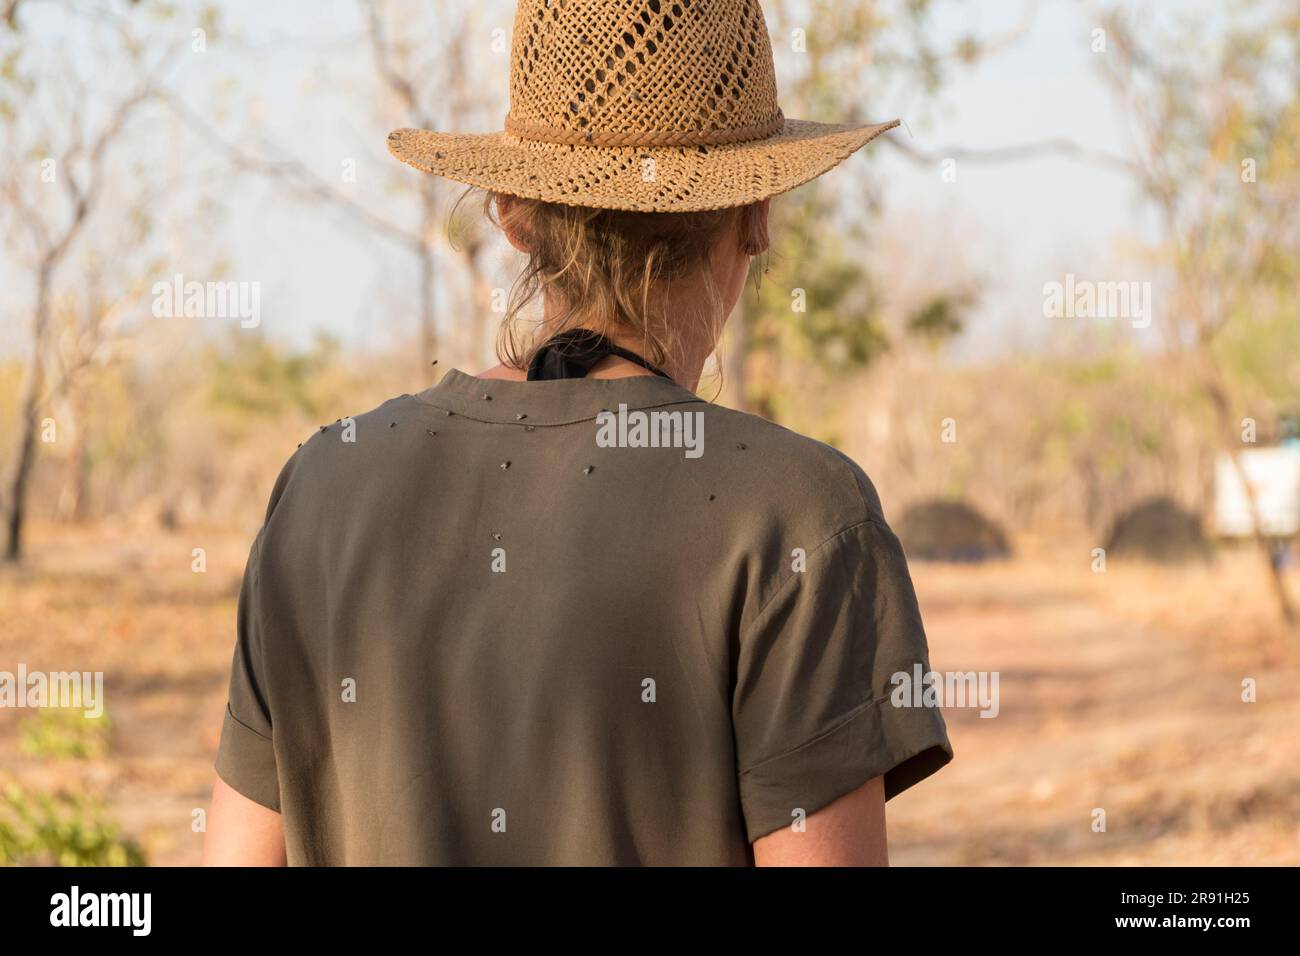 A woman in a sun hat is covered with flies on her back in the heat of the outback in Australia Stock Photo